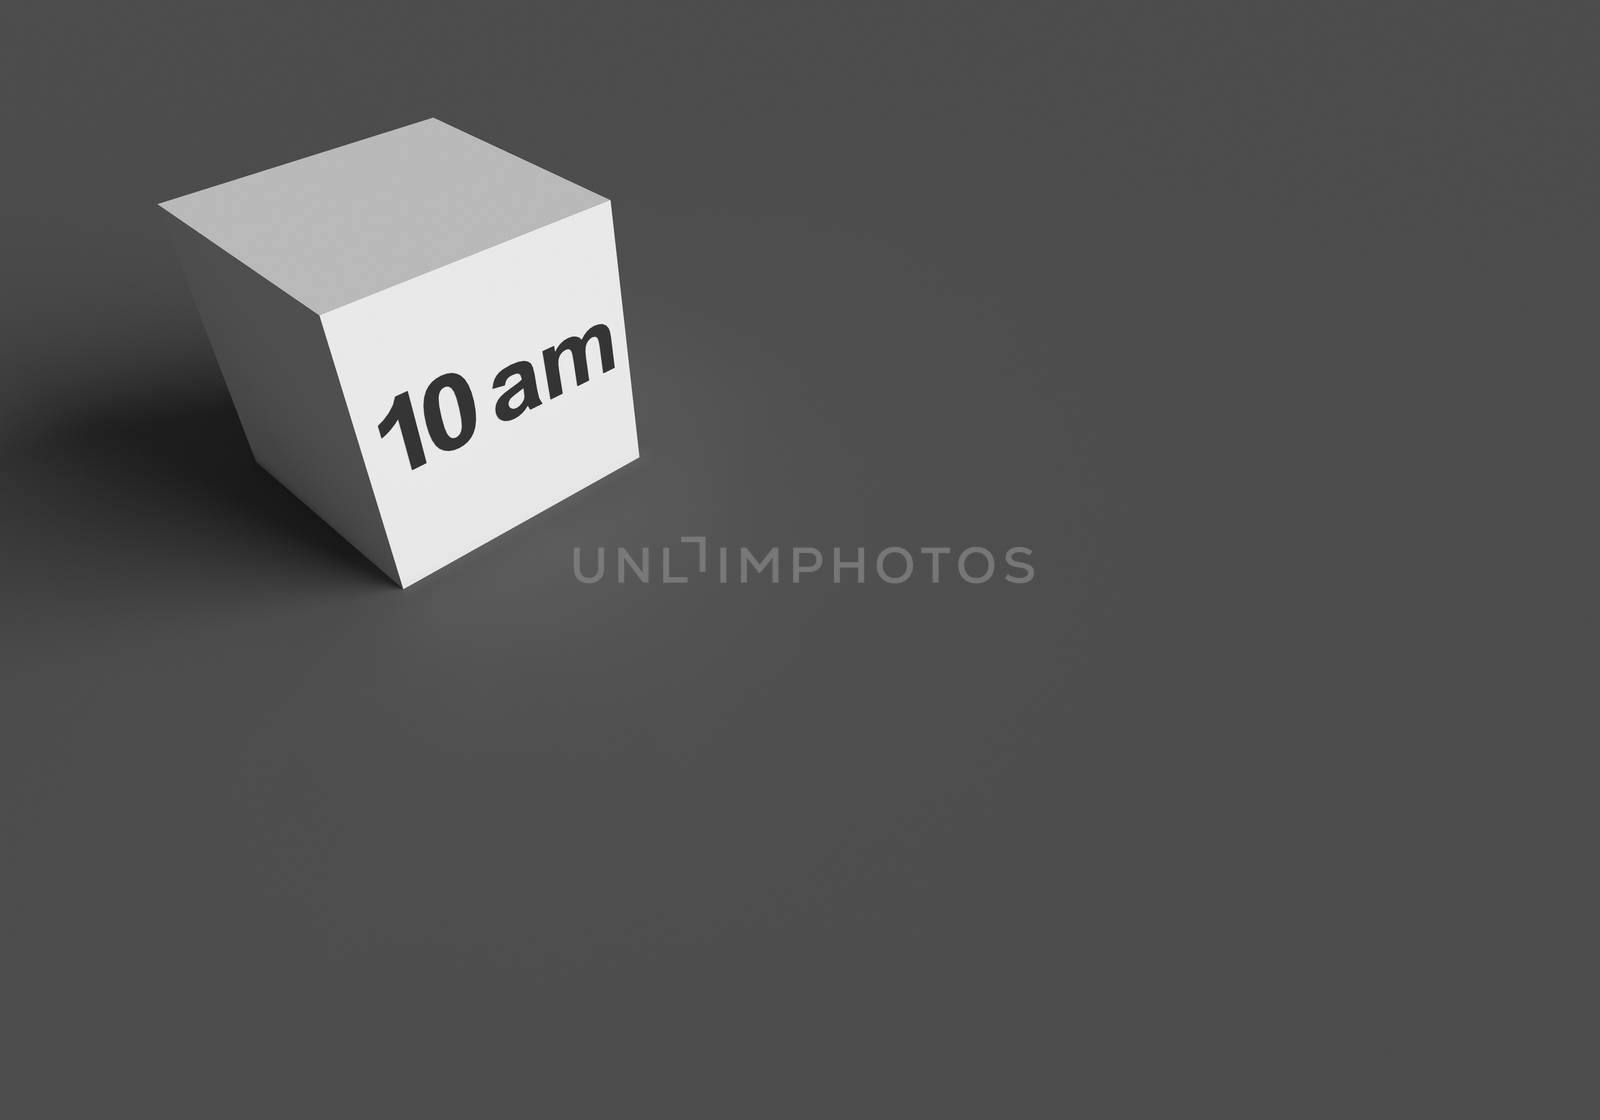 3D RENDERING WORDS 10 am ON WHITE CUBE by PrettyTG